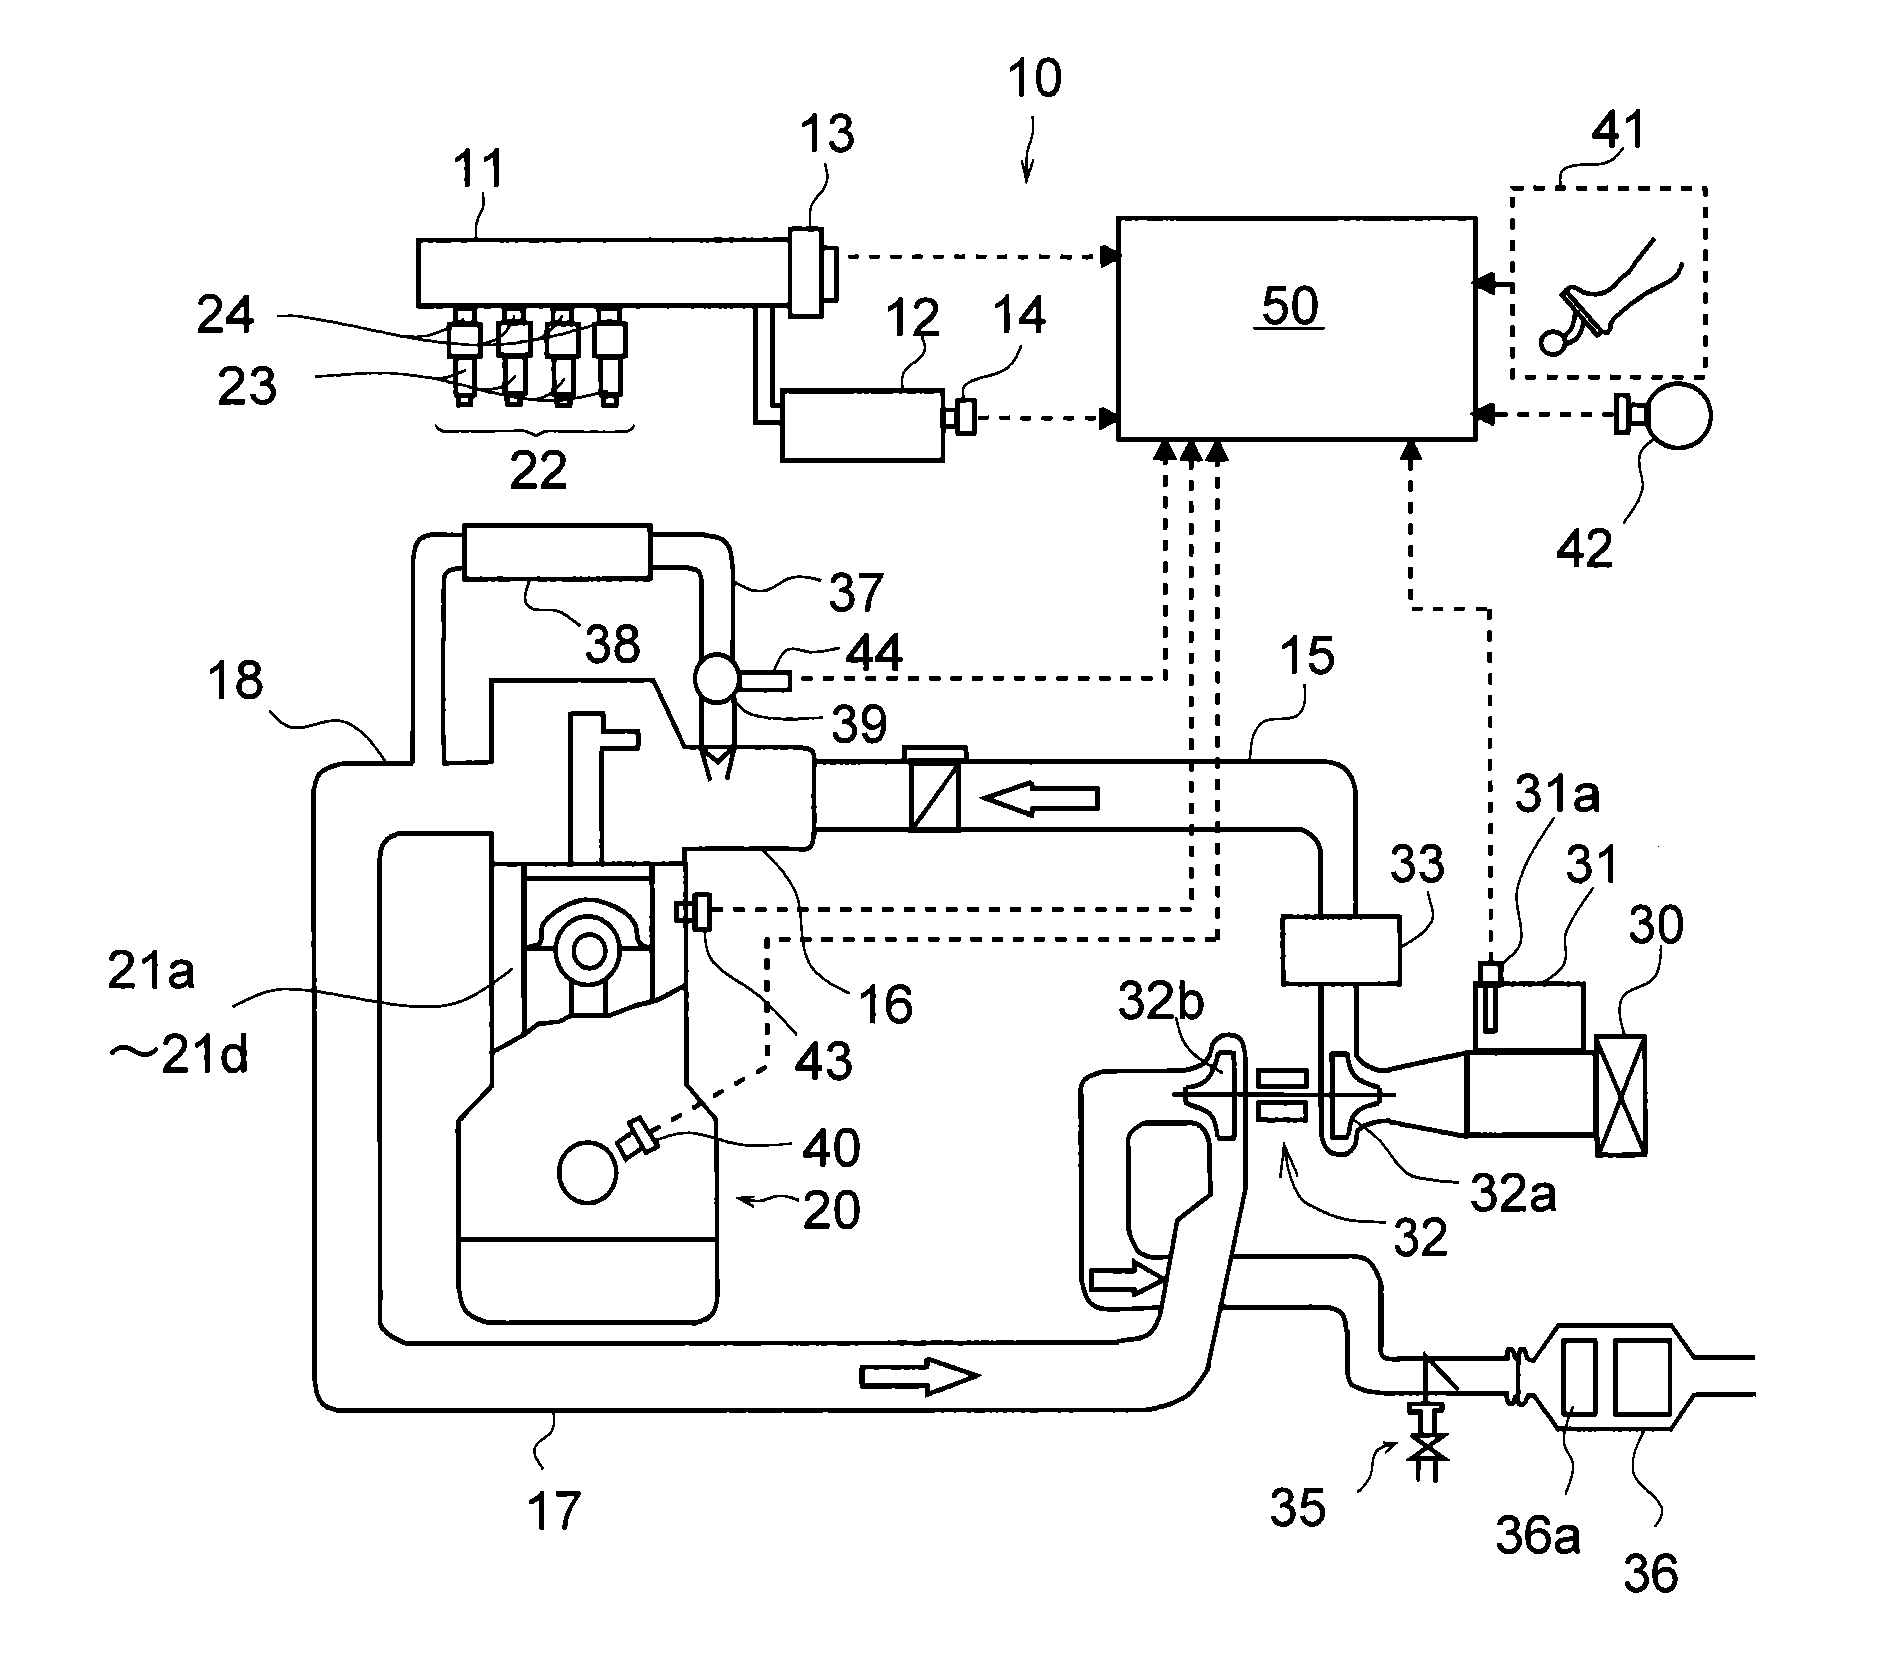 Combustion diagnosis device for internal combustion engine